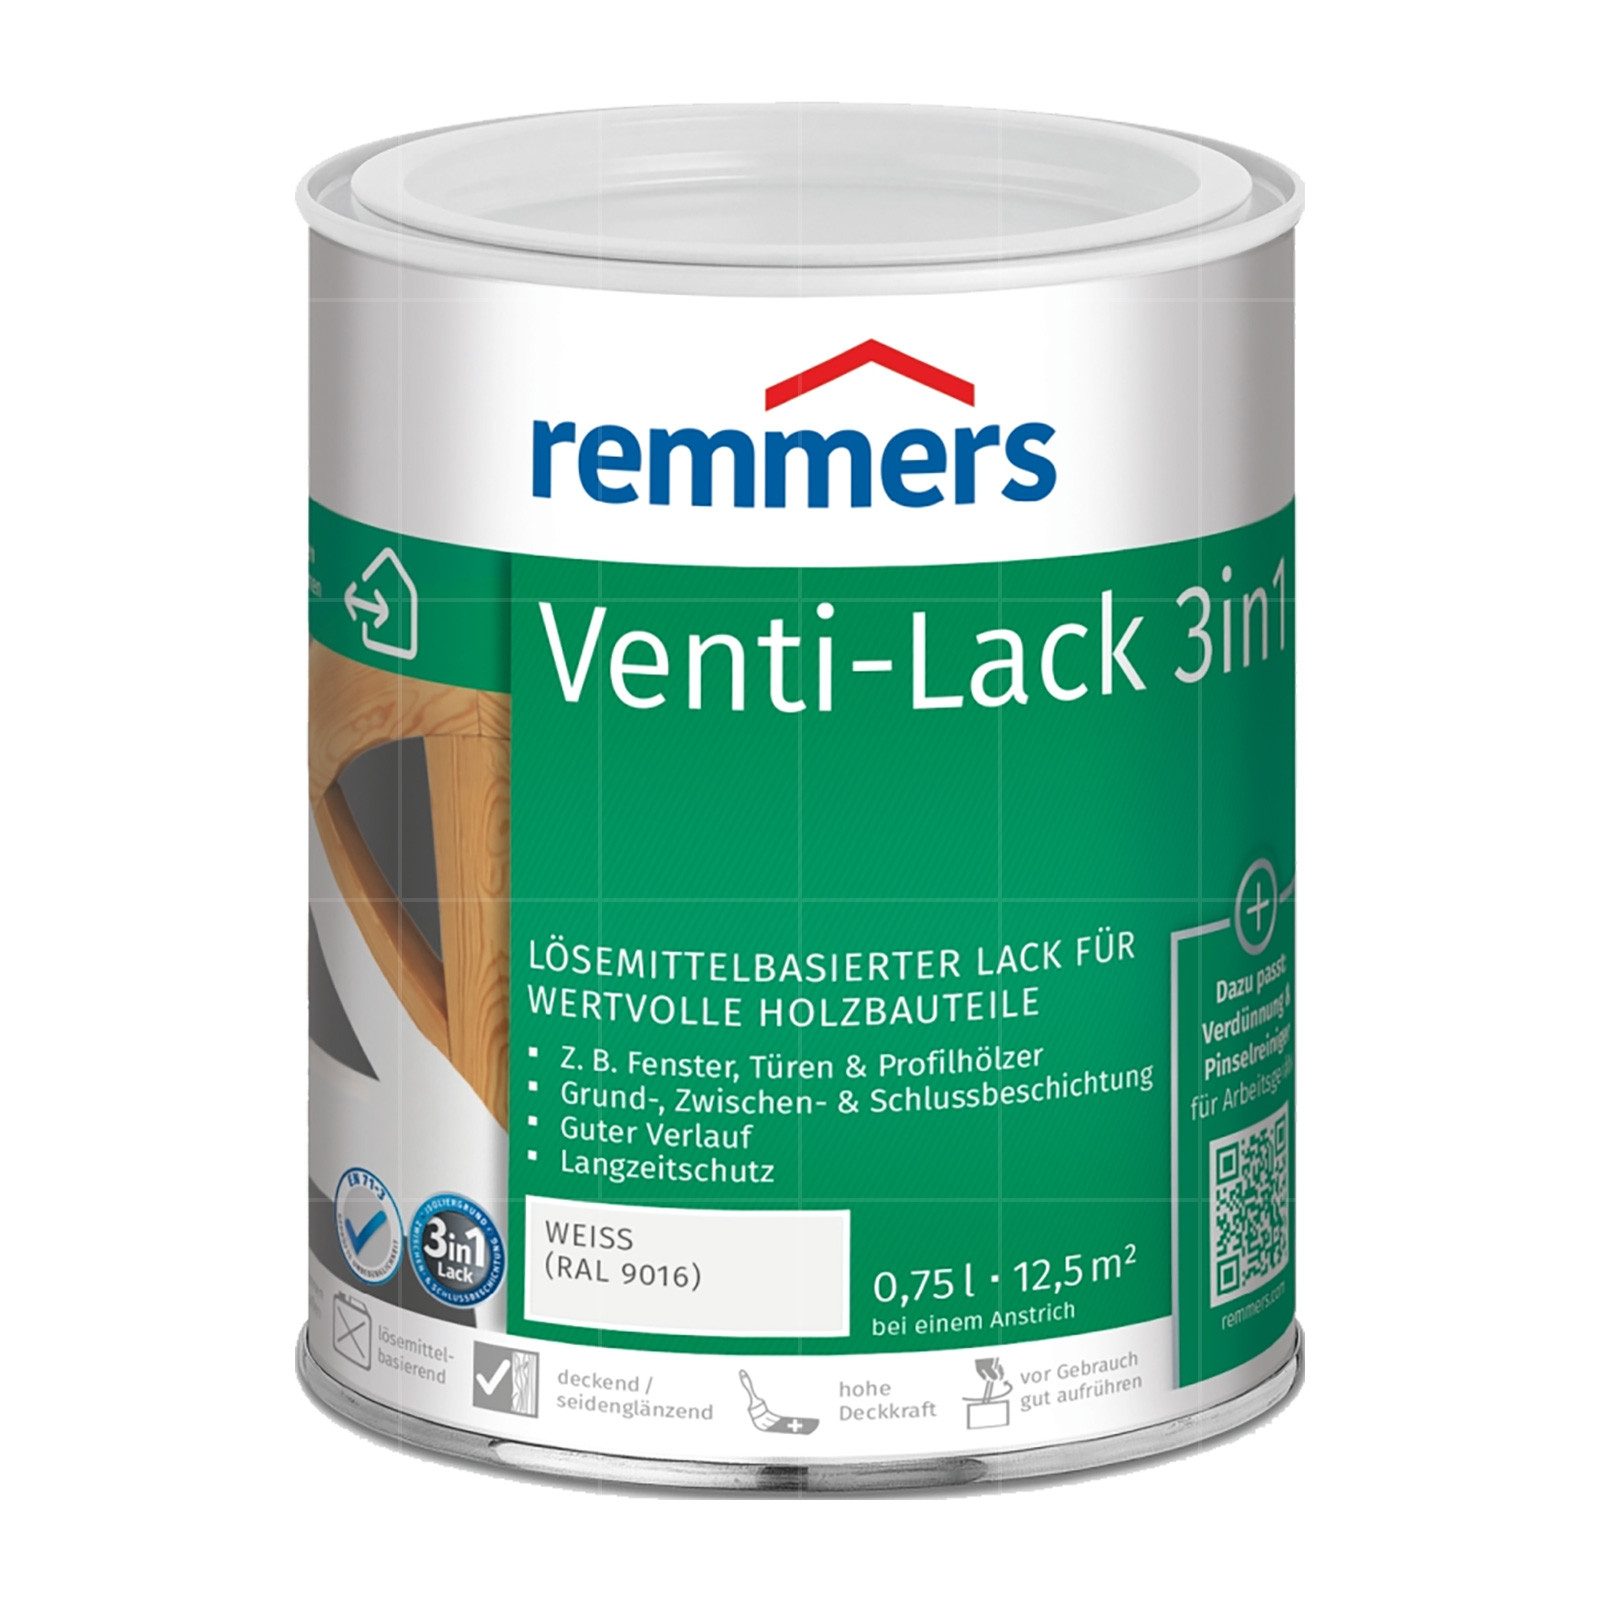 Remmers Holzlack VENTI-LACK 3IN1 - 0.75 LTR